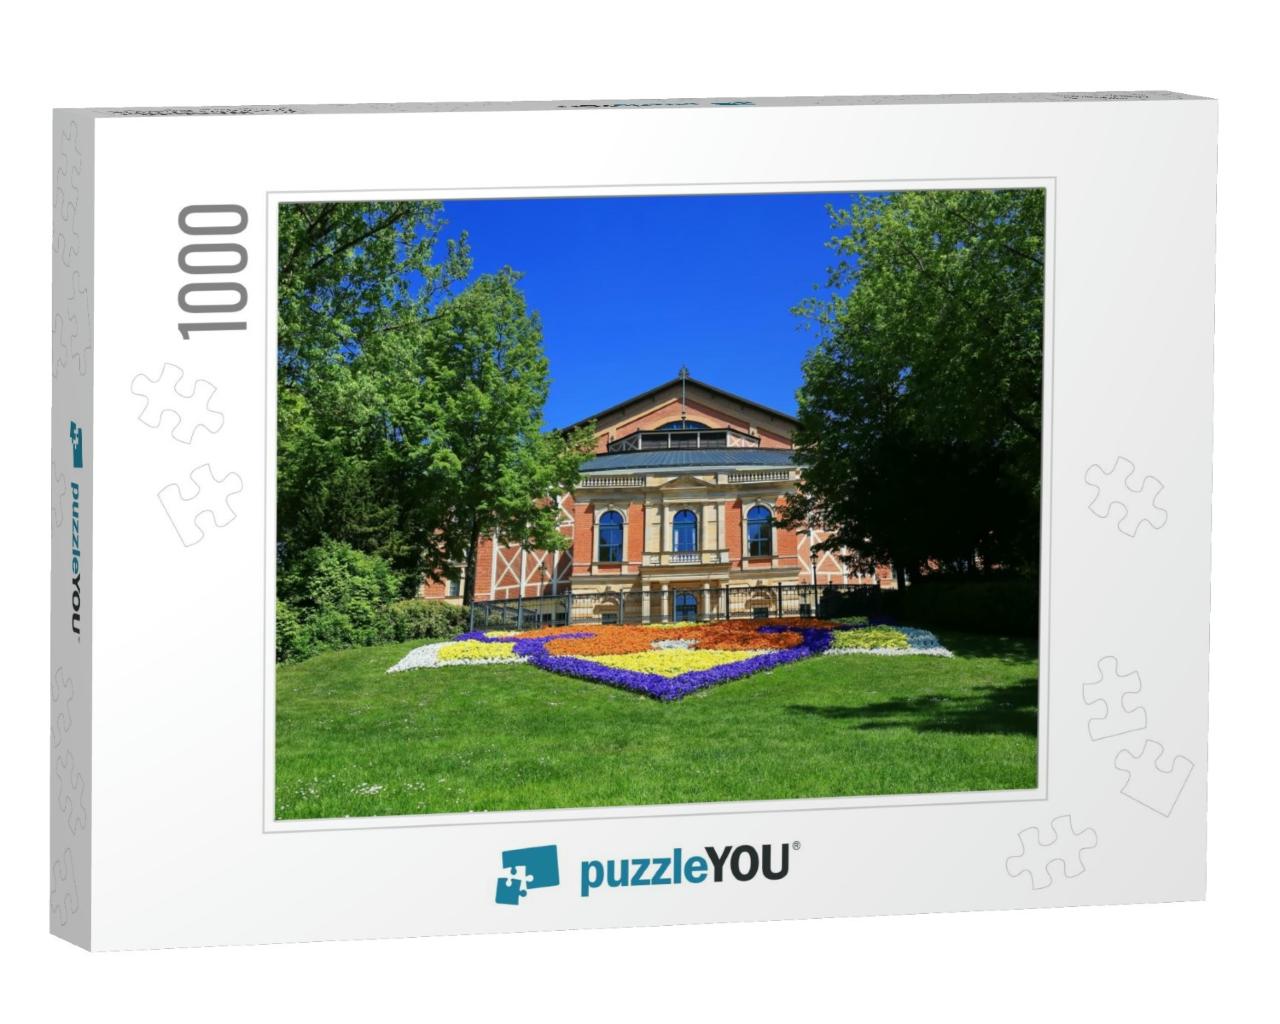 Festspiele in Bayreuth is a City in Bavaria, Germany, wit... Jigsaw Puzzle with 1000 pieces